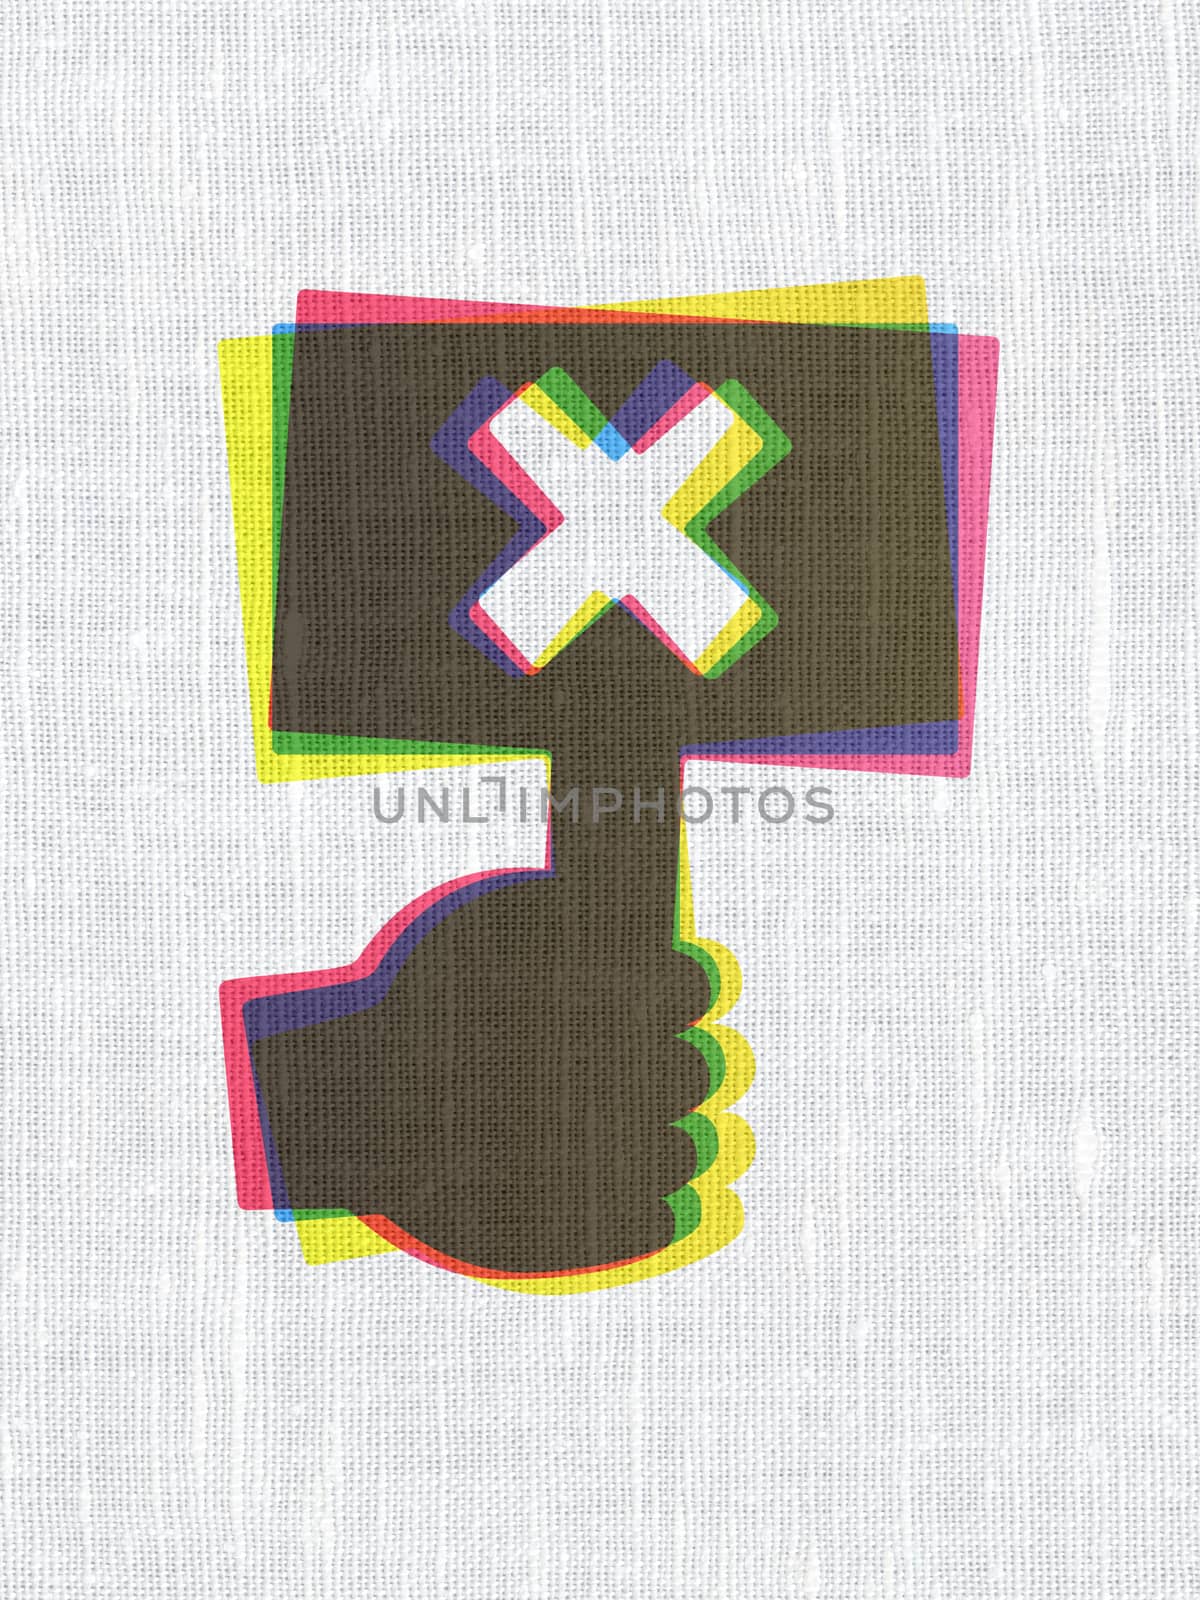 Political concept: CMYK Protest on linen fabric texture background